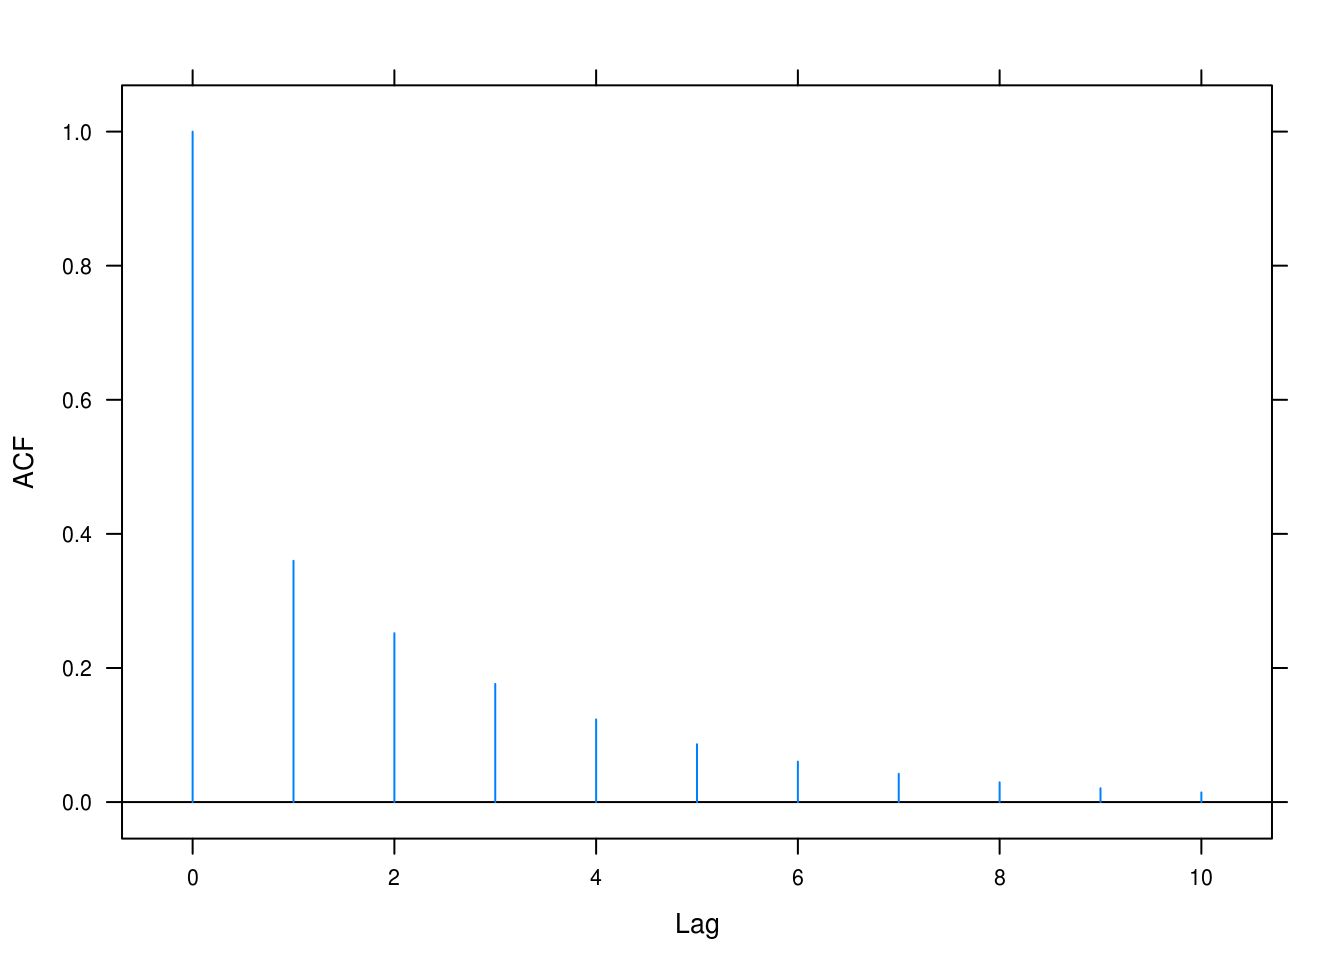 ACF for ARMA(1,1) with $\phi = 0.7$ and $\theta = 0.4$.